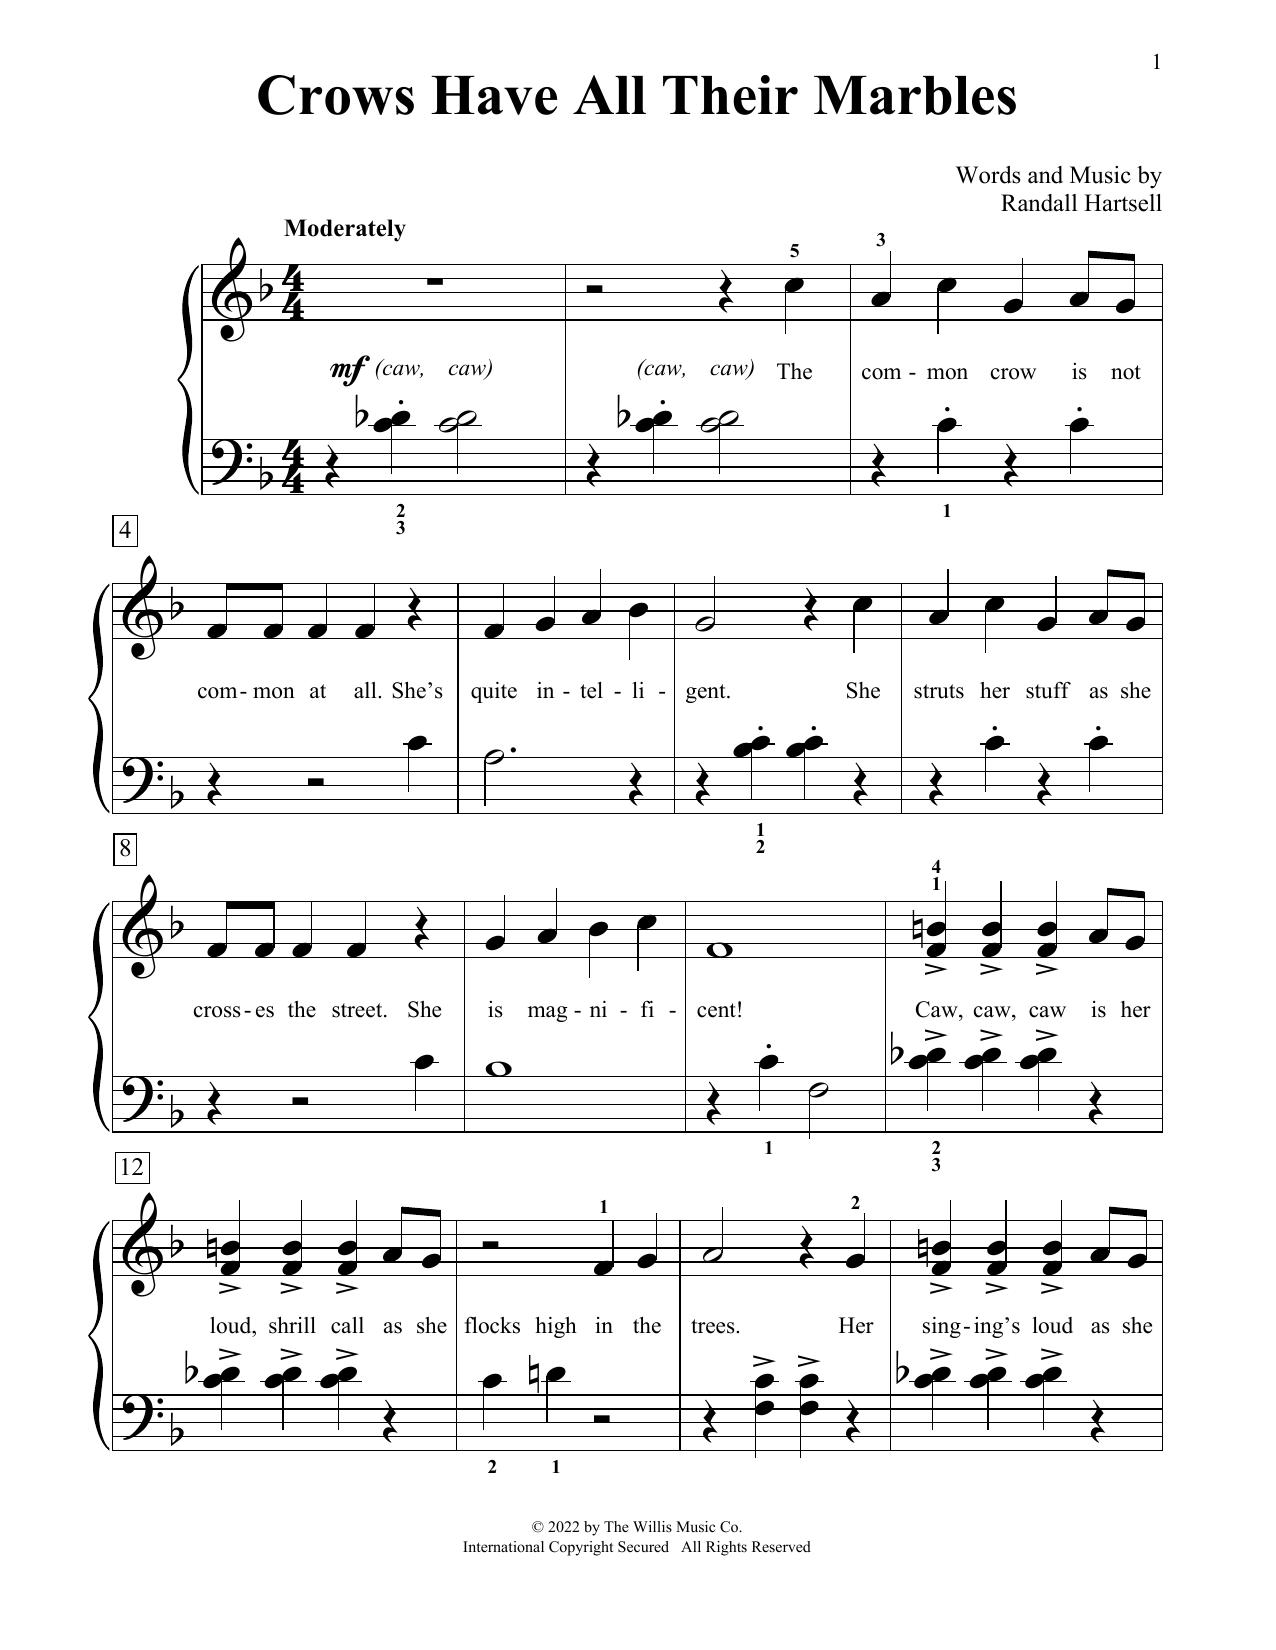 Download Randall Hartsell Crows Have All Their Marbles Sheet Music